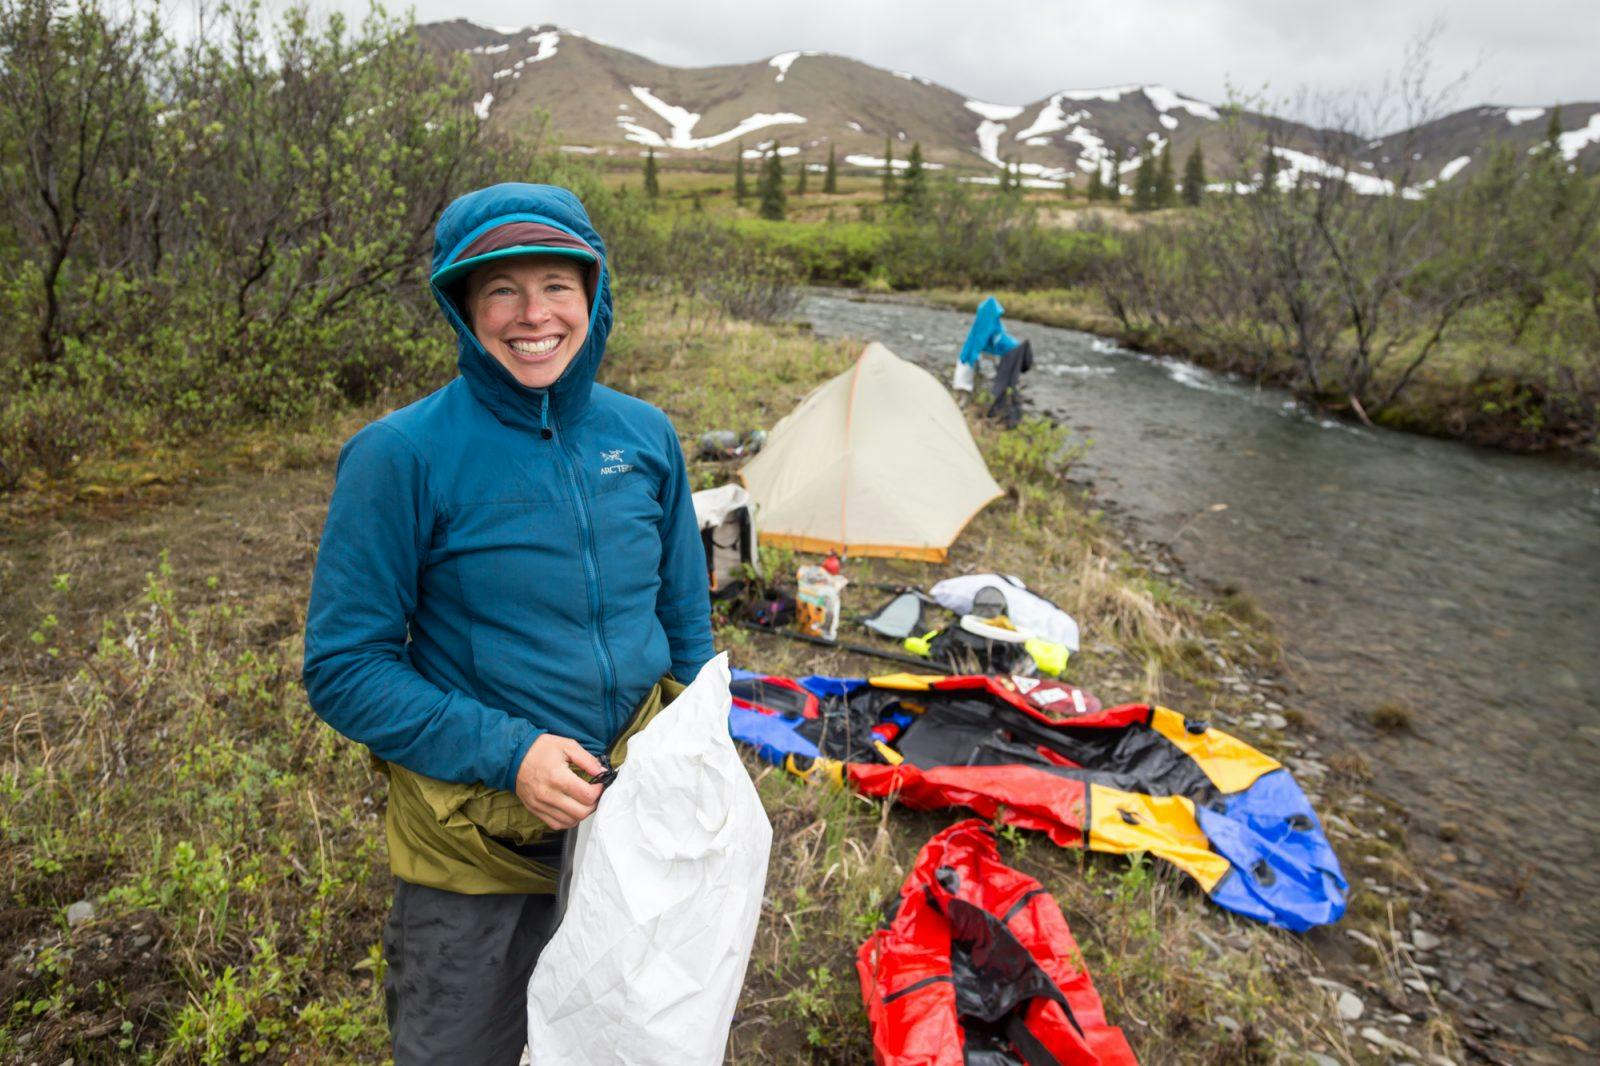 Sarah Miller Histand with her world-class smile on a backcountry packrafting trip! &#x1F4F8;: Luc Mehl.